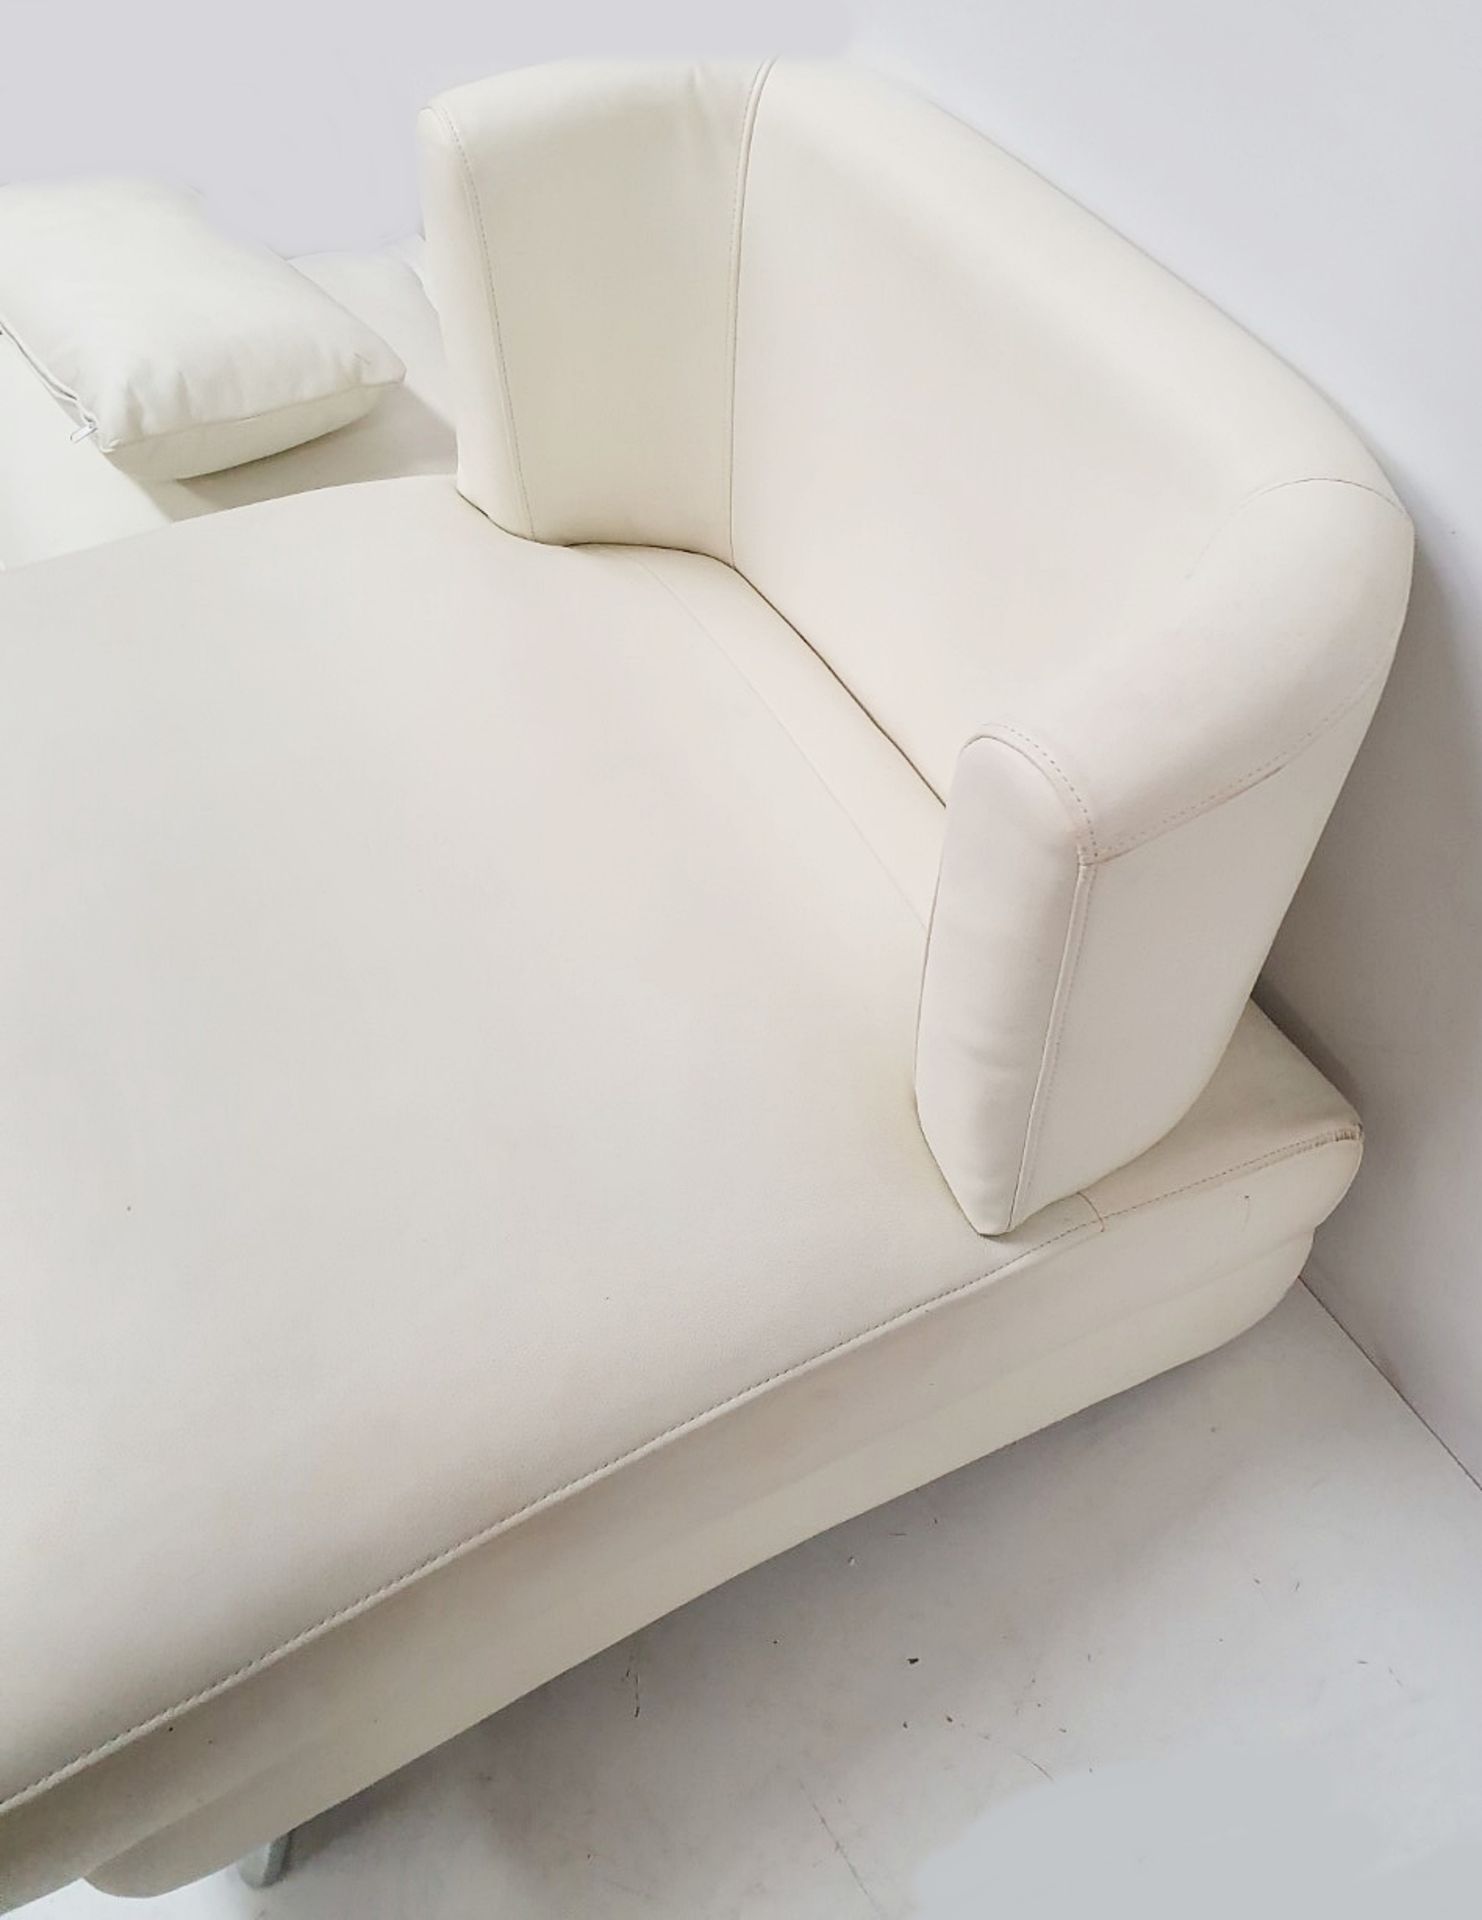 1 x Leather Lounge Chair in Cream - CL380 - Ref: H580 - Location Altrincham WA14 - NO VAT - Image 13 of 13